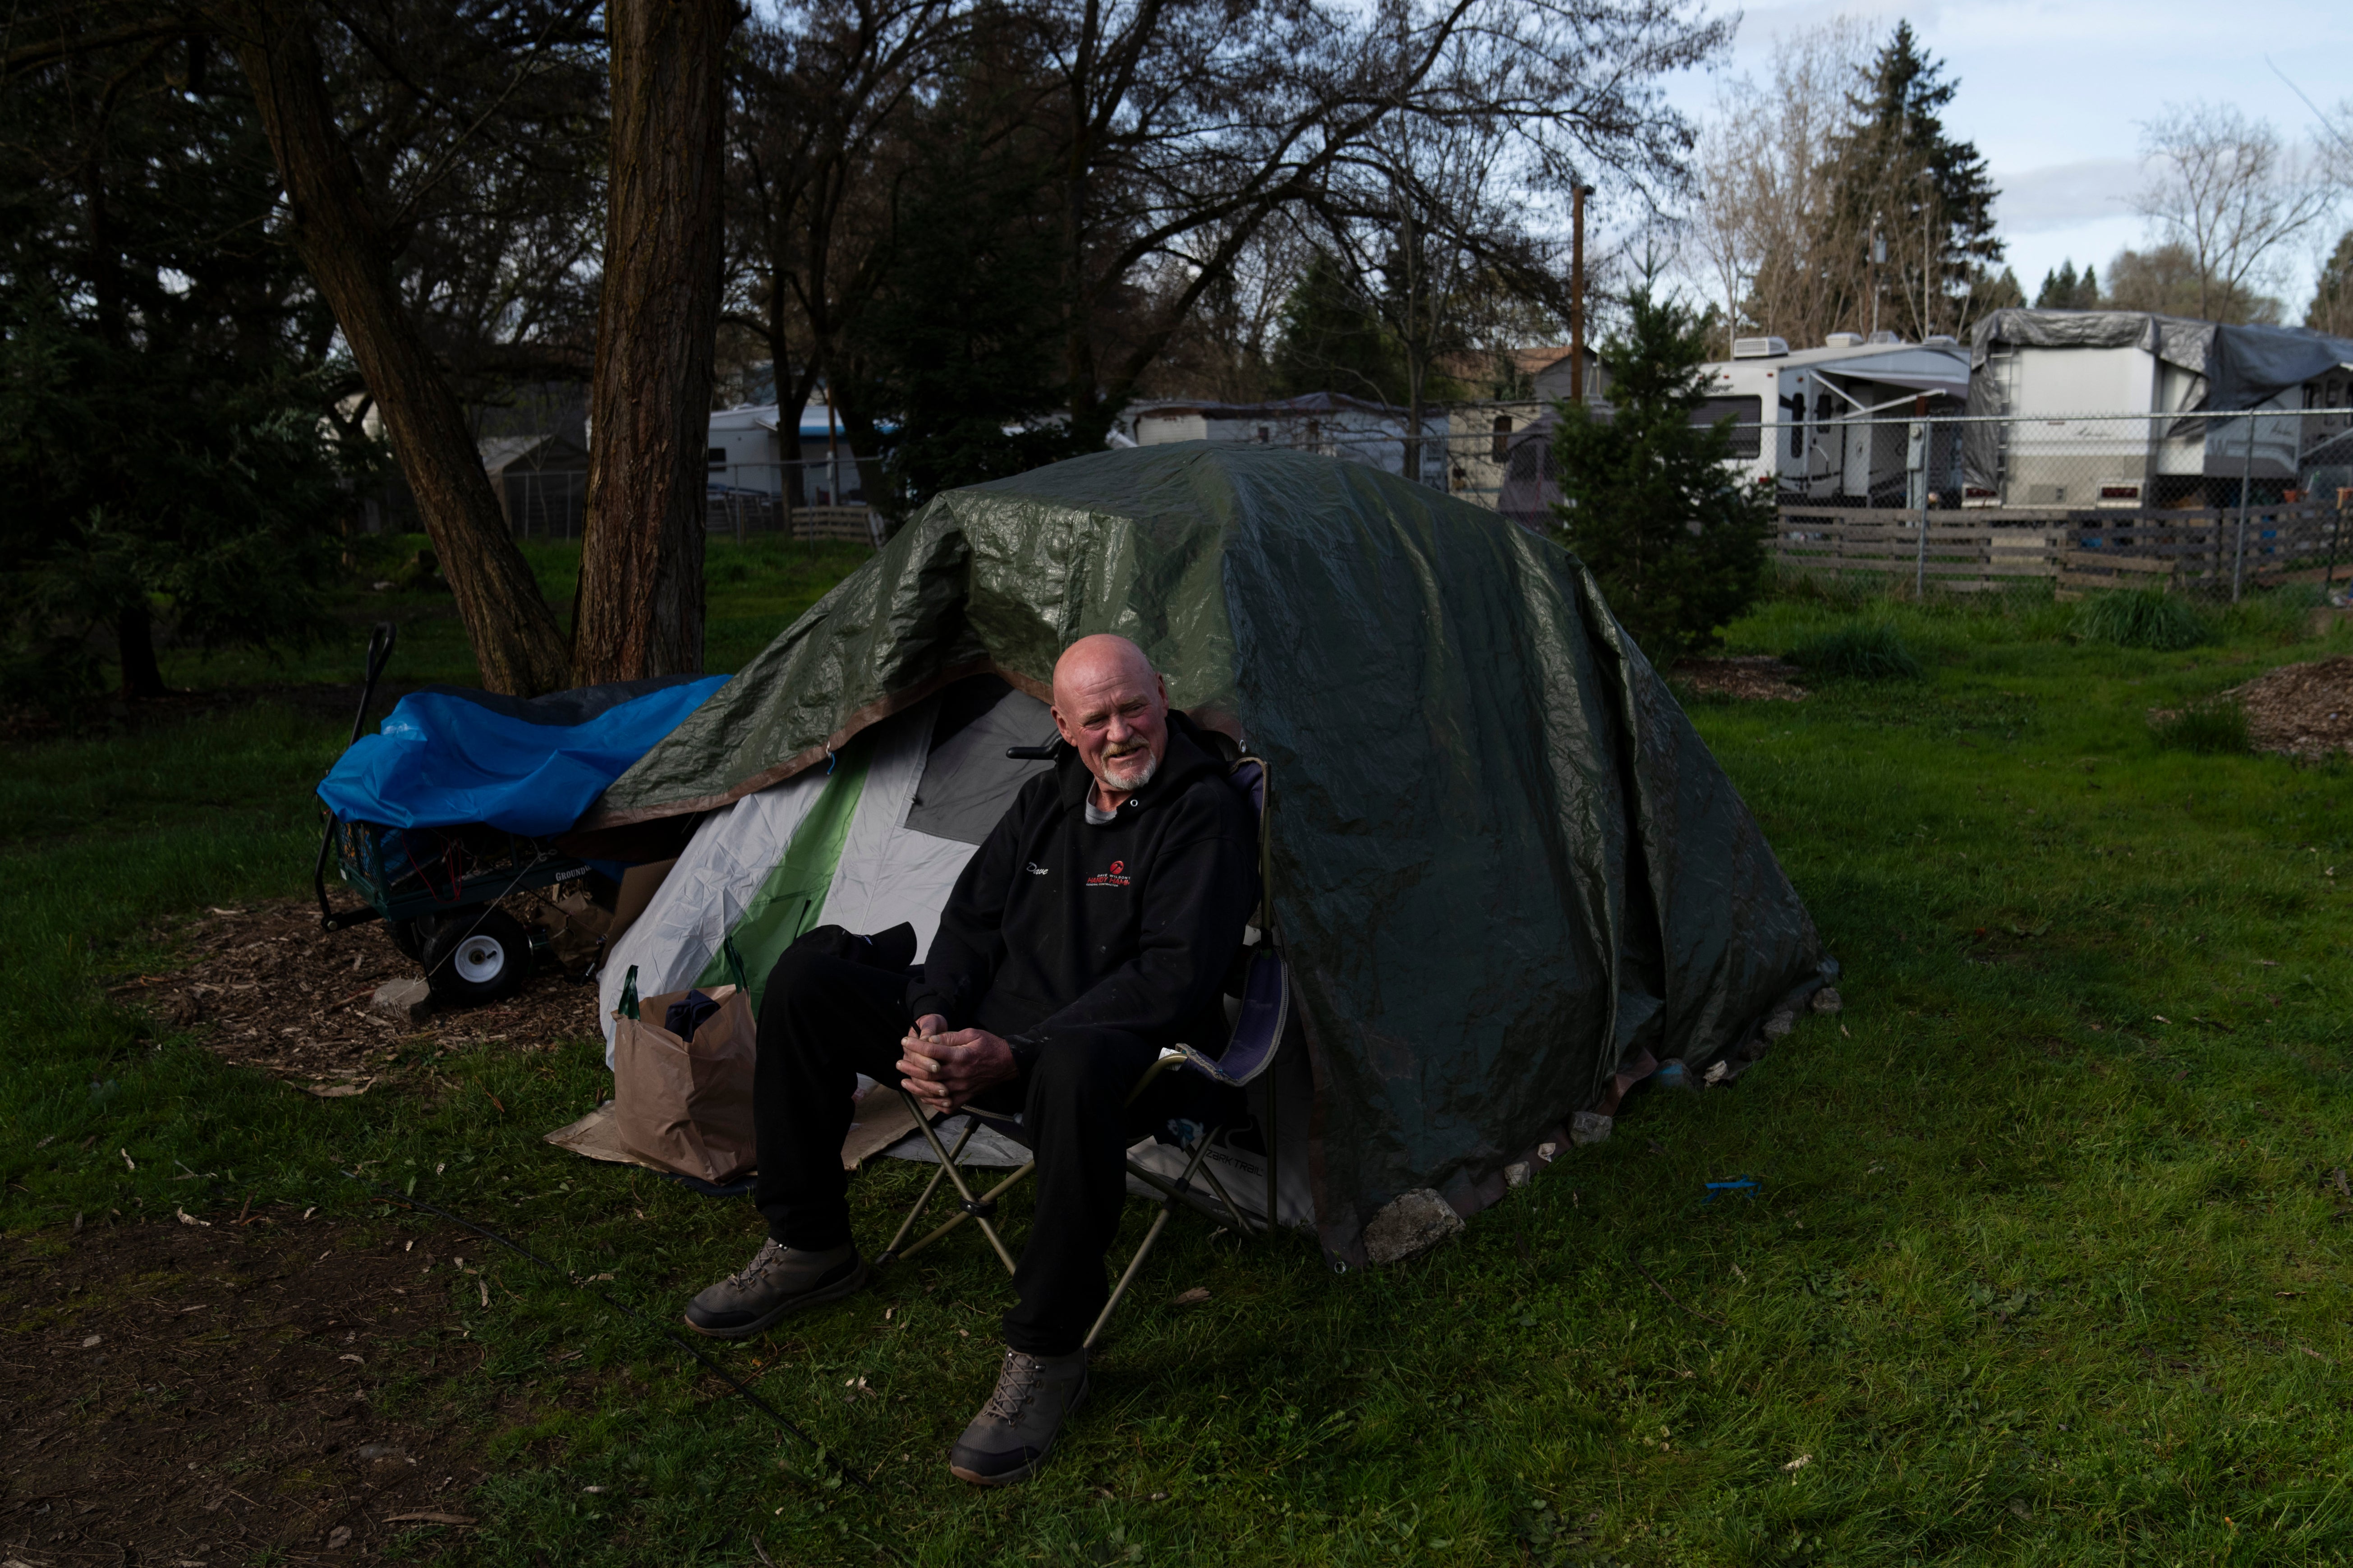 David Wilson sits outside his tent at Riverside Park on Thursday, March 21, in Grants Pass, Oregon. Grants Pass officials argued the laws, enacted in 2013, were created to make it more “uncomfortable” for people to sleep outside after locals raised safety concerns